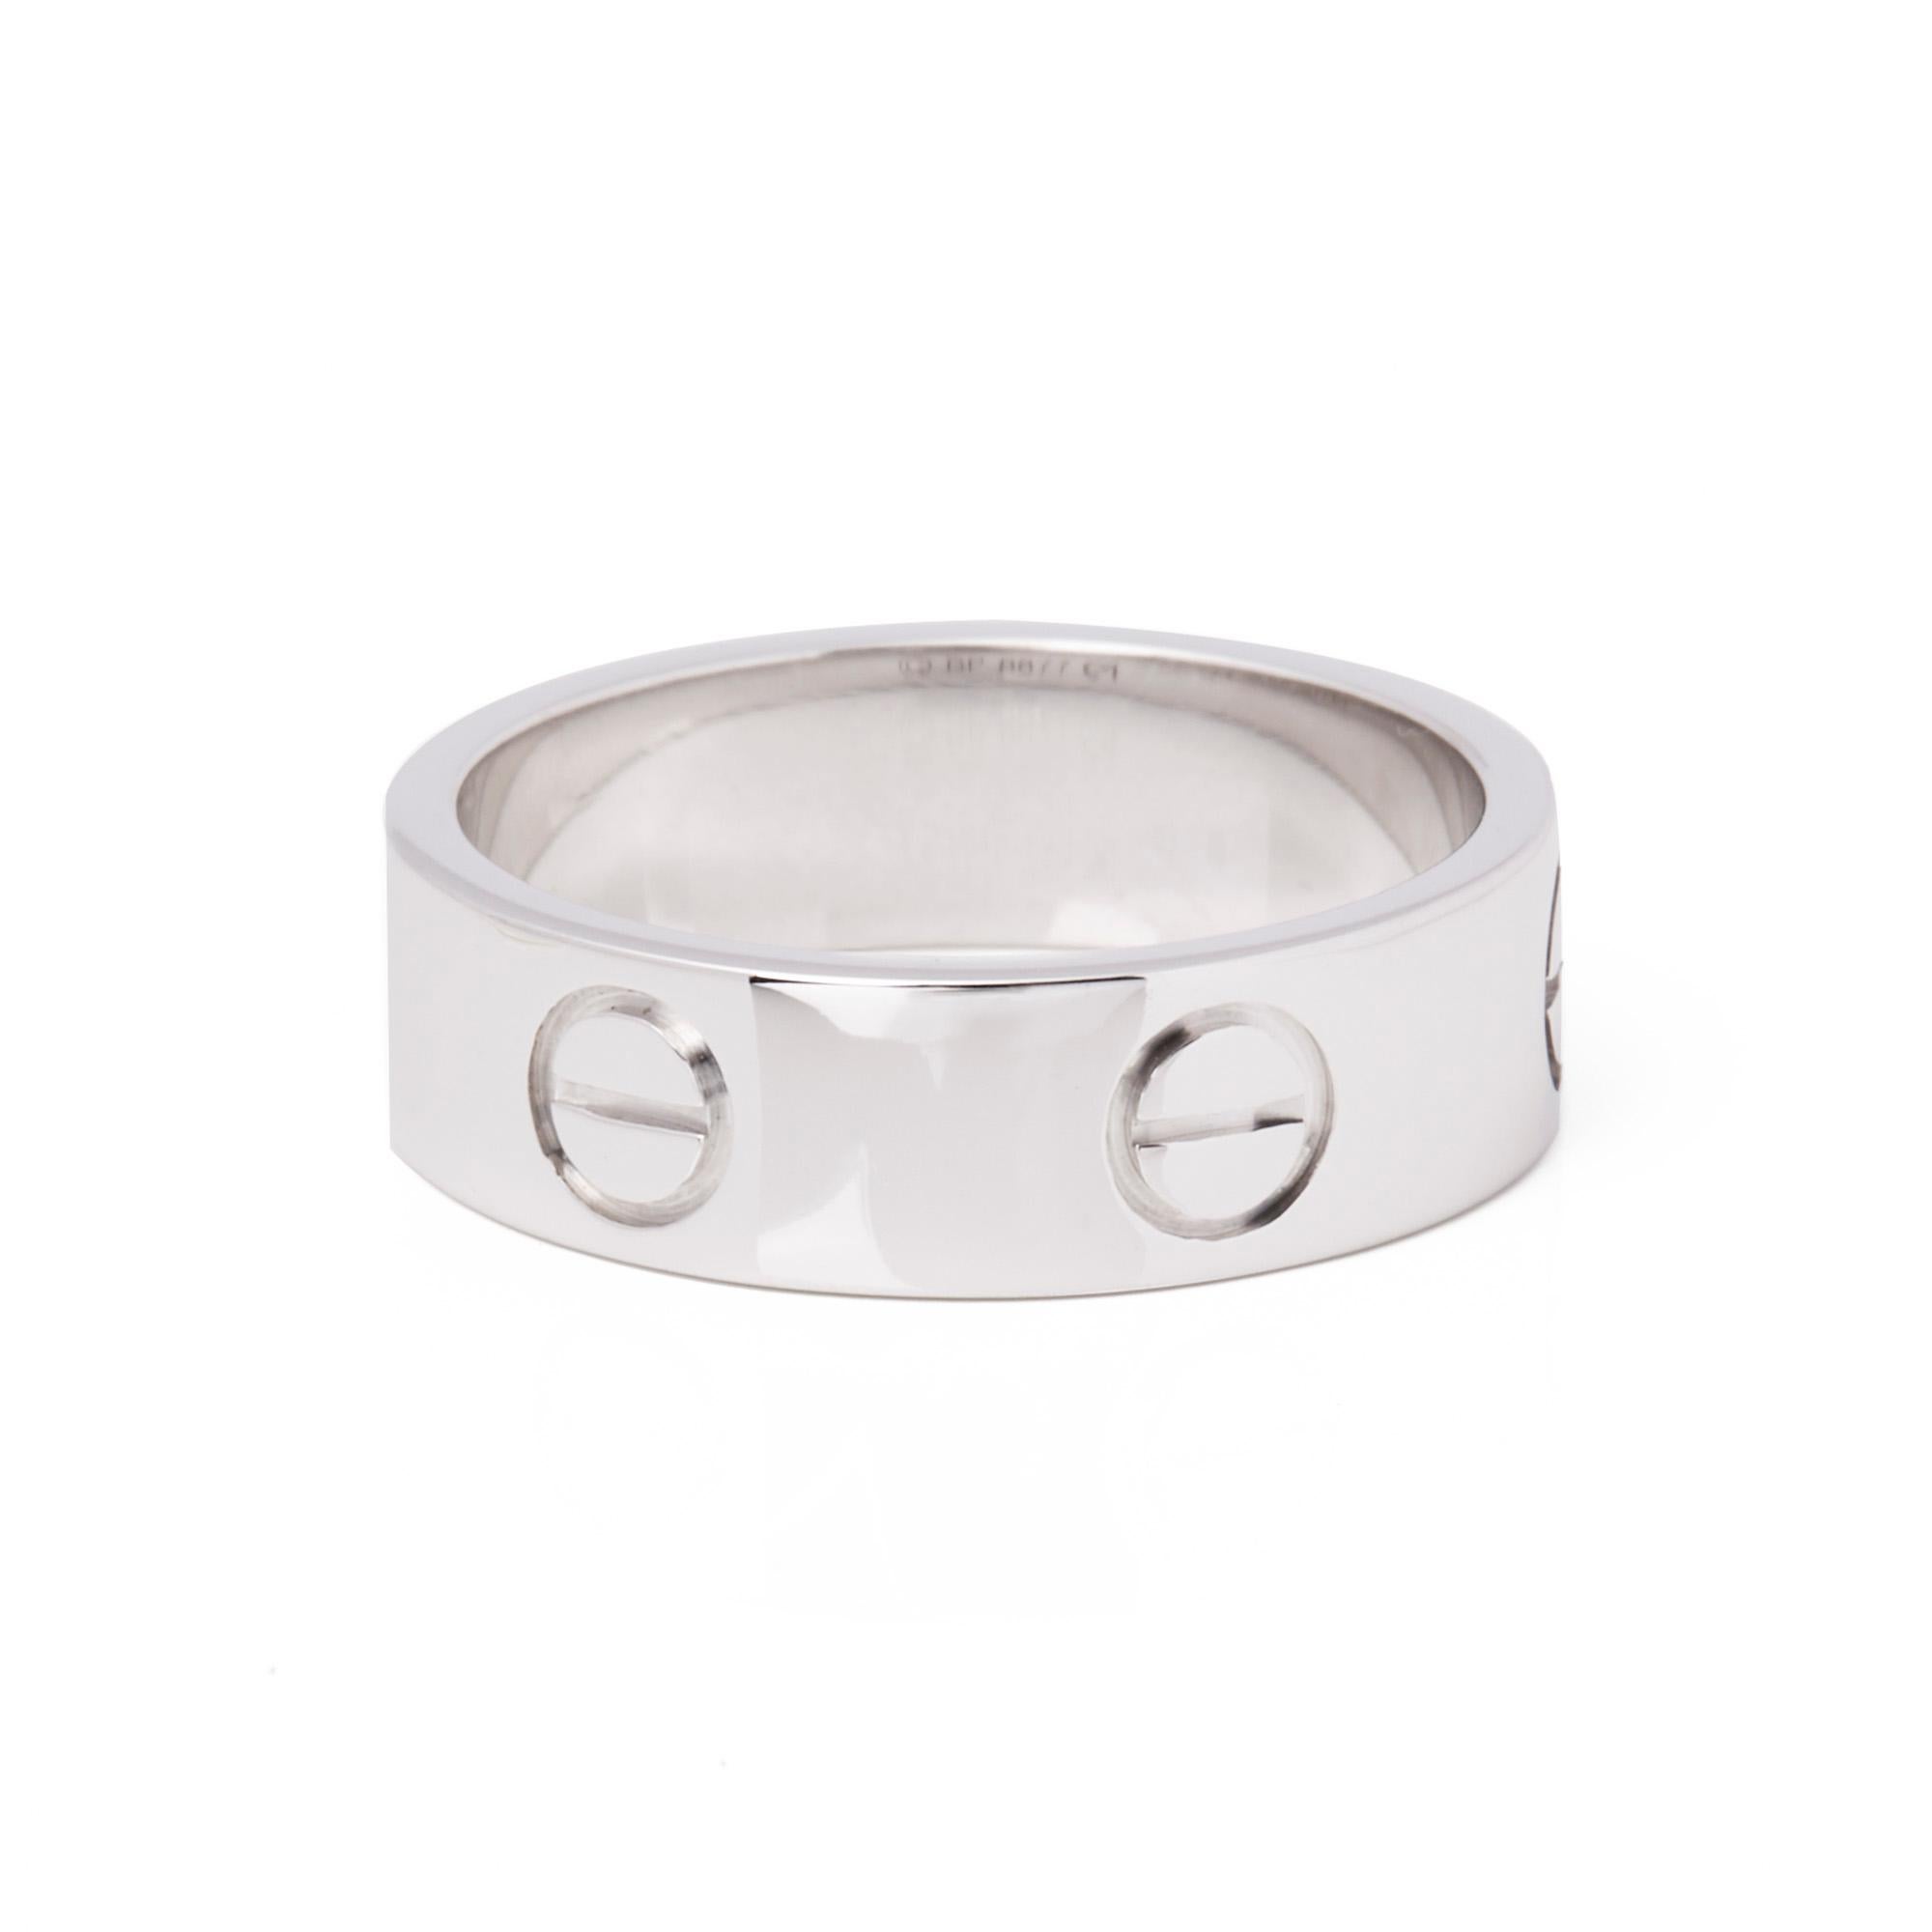 This ring by Cartier is from their Love collection and features their iconic screw detail set in 18ct white gold. UK ring size K. EU ring size 50. US ring size 5 1/4. Complete with Xupes presentation box. Our Xupes reference is COMJ482 should you